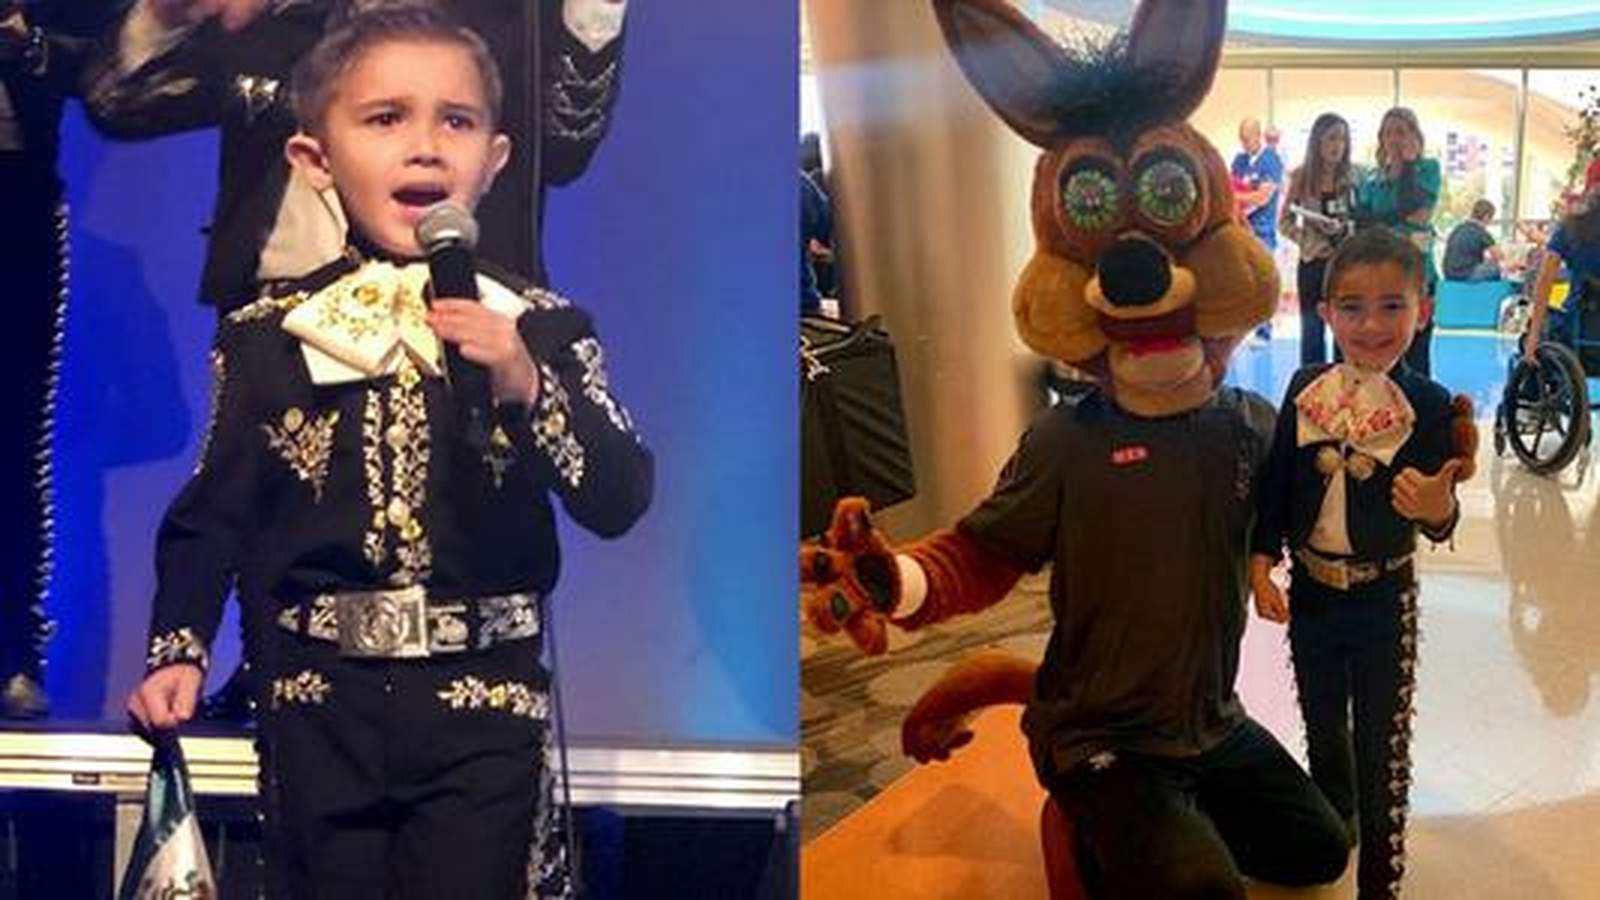 5-year-old mariachi singer from San Antonio to appear on Melissa McCarthy-hosted show